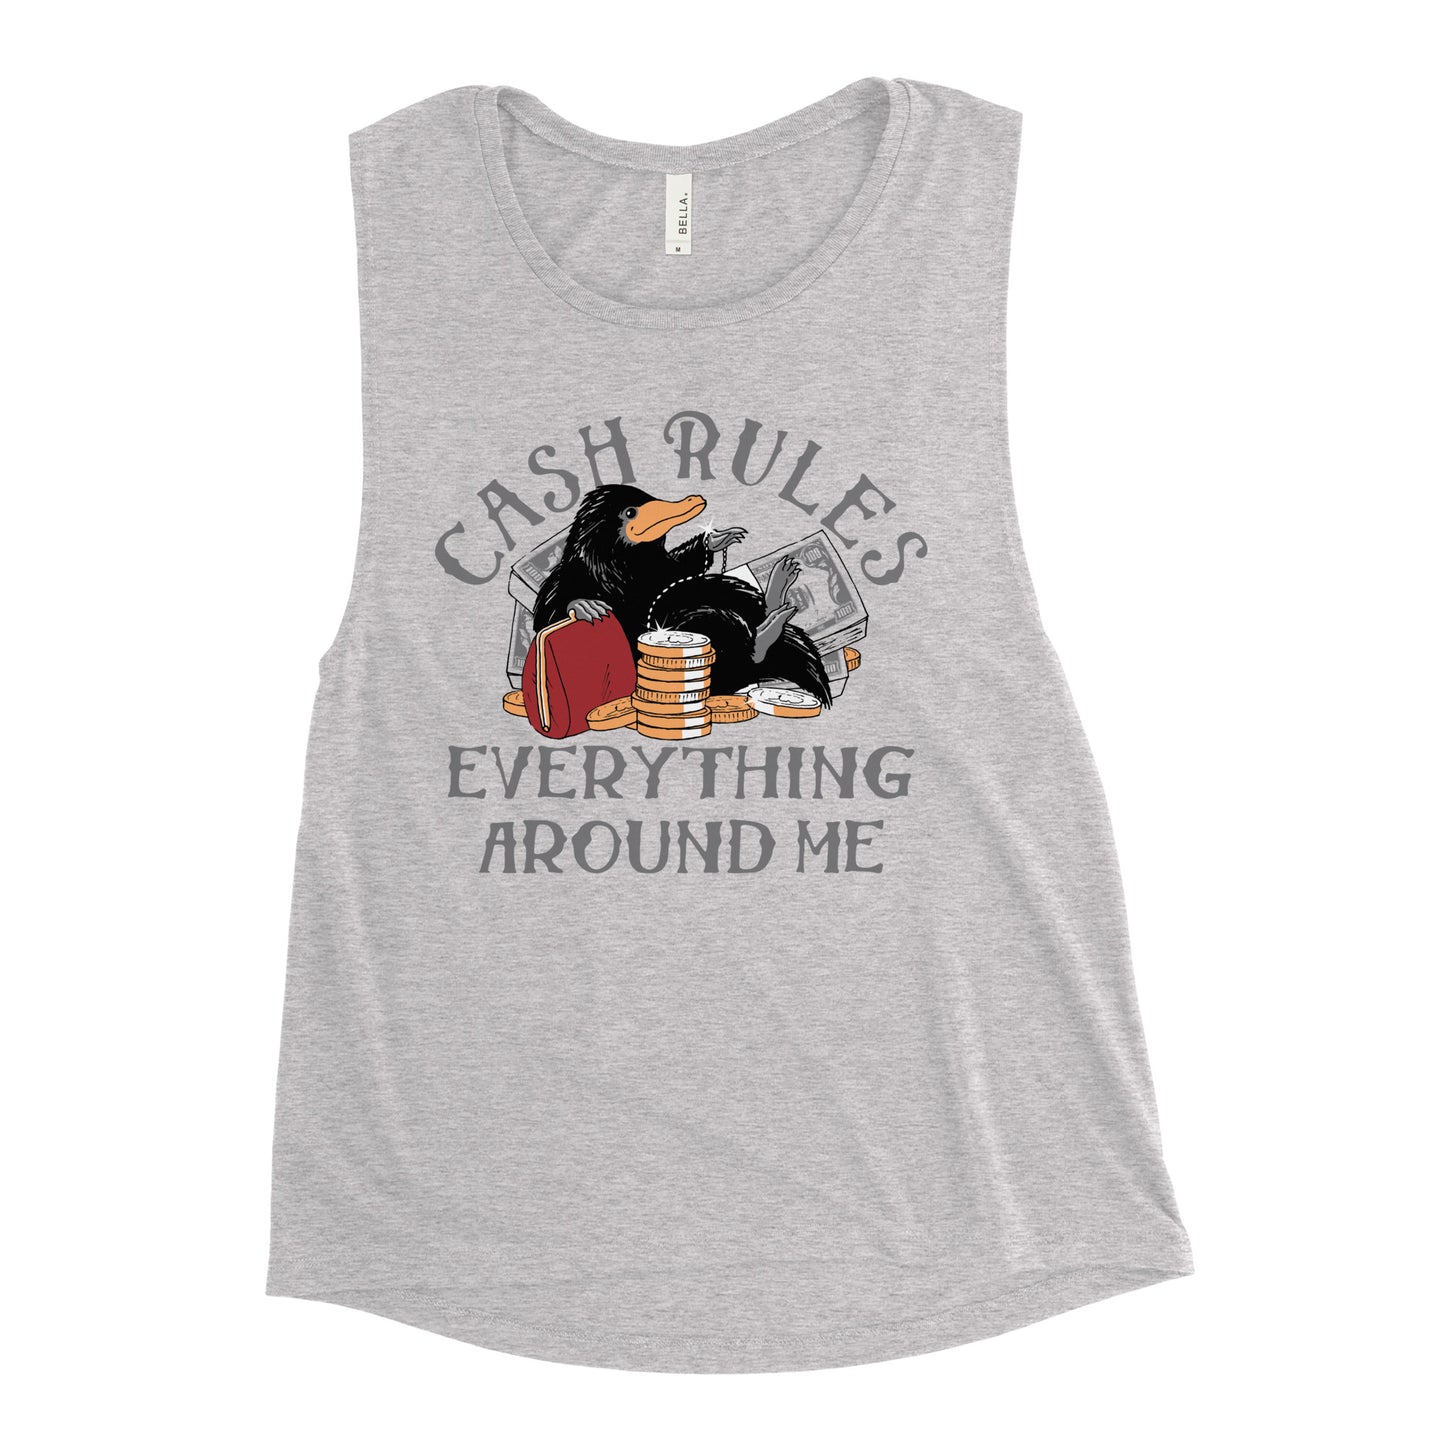 Cash Rules Everything Around Me Women's Muscle Tank